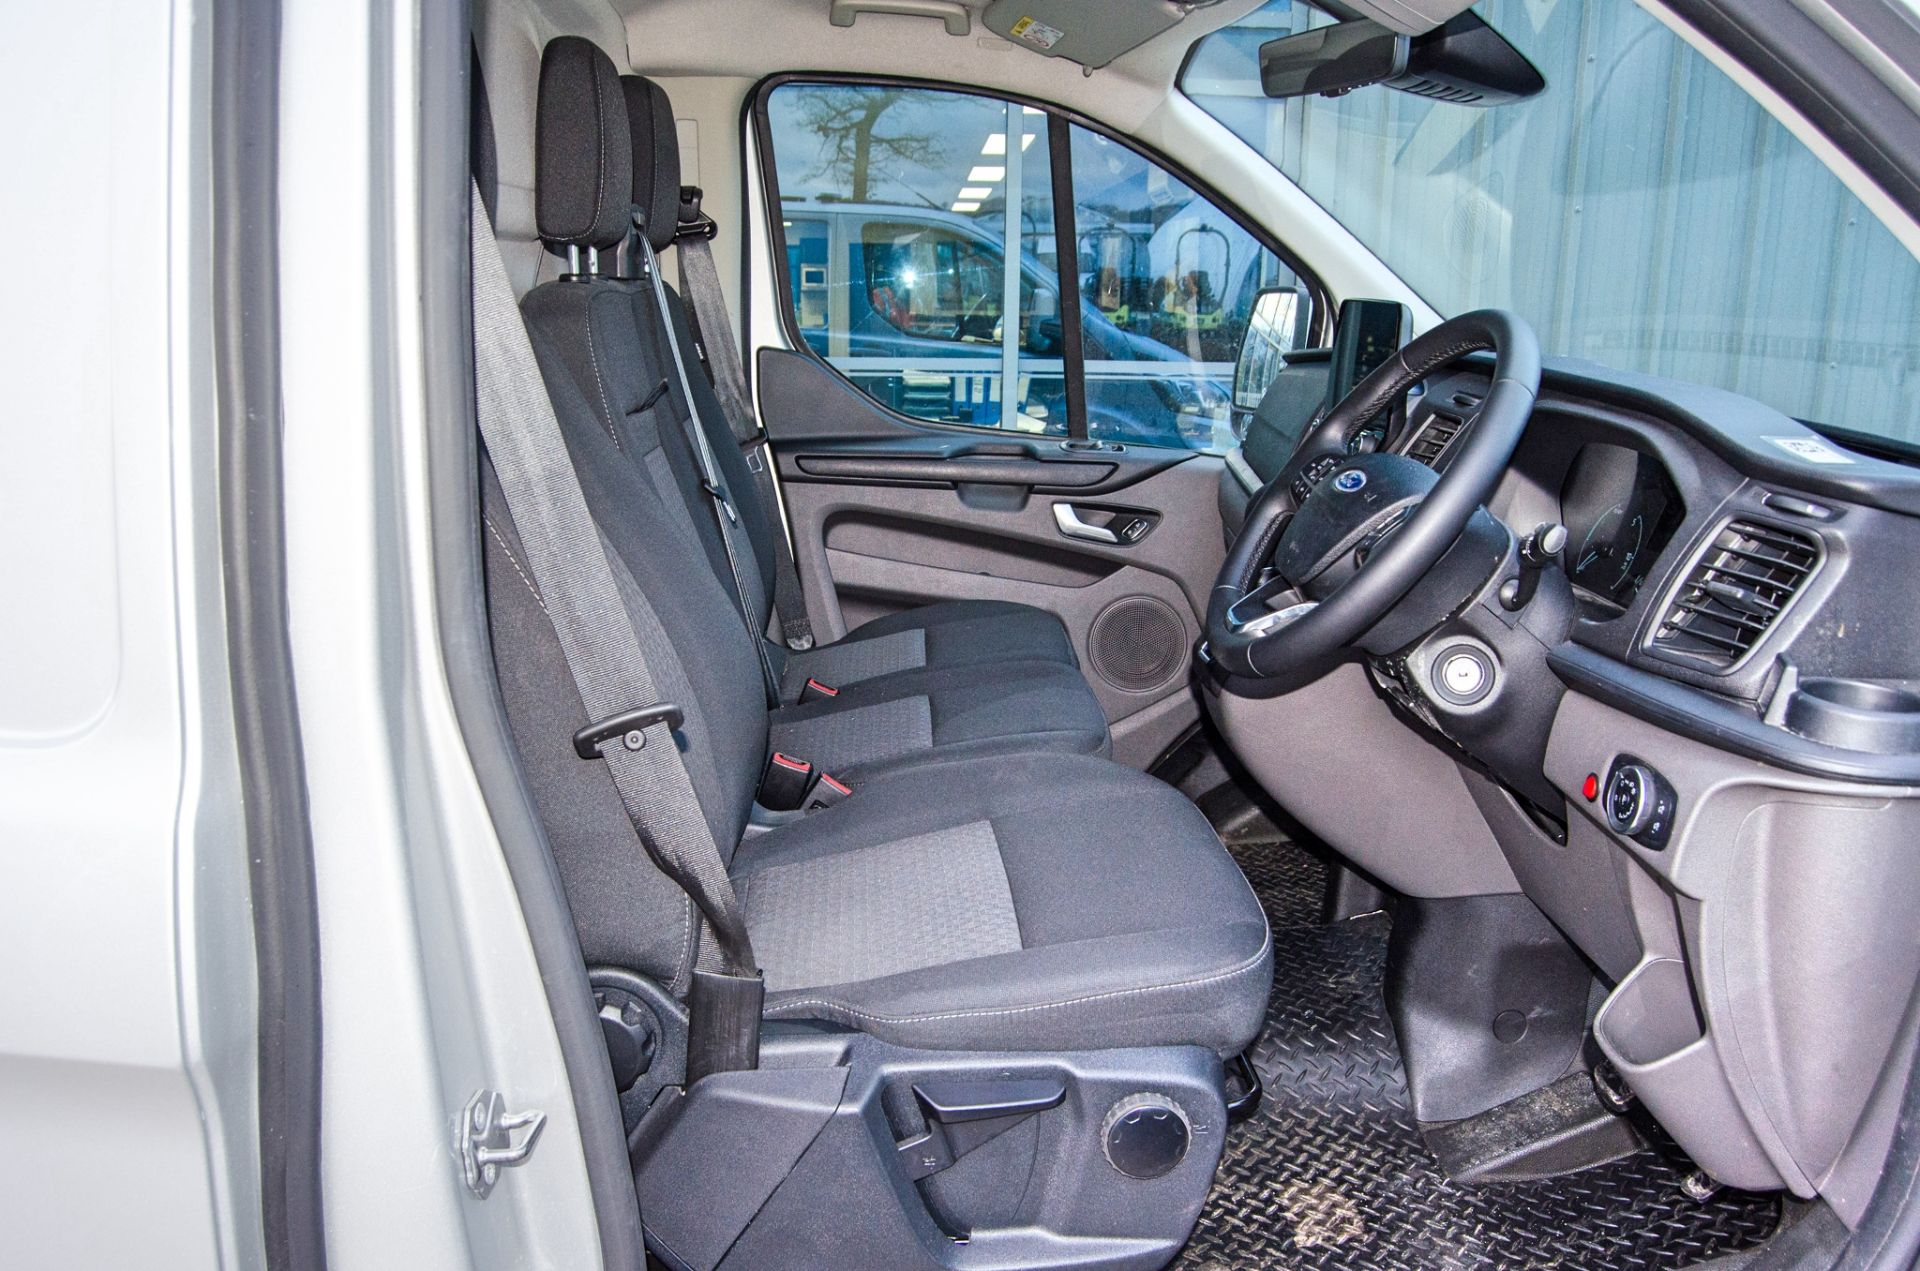 Ford Transit Custom 340 Trend L1 H1 Euro 6 plug in hybrid automatic window cleaning converted - Image 21 of 34